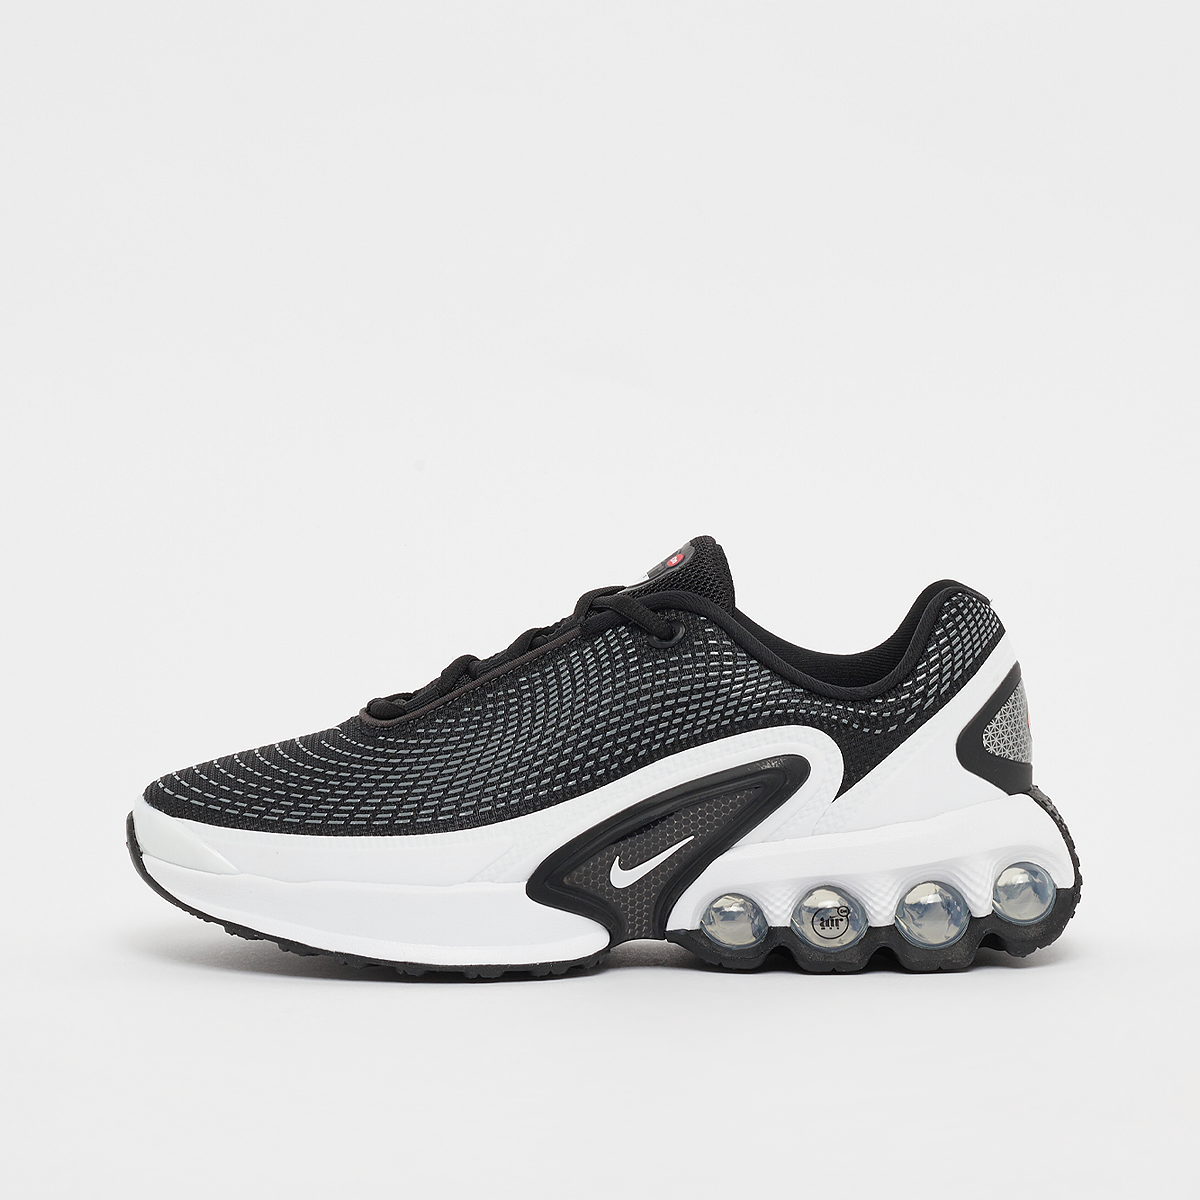 Air Max DN (GS), NIKE, Footwear, black/white-cool grey-antracite, taille: 38